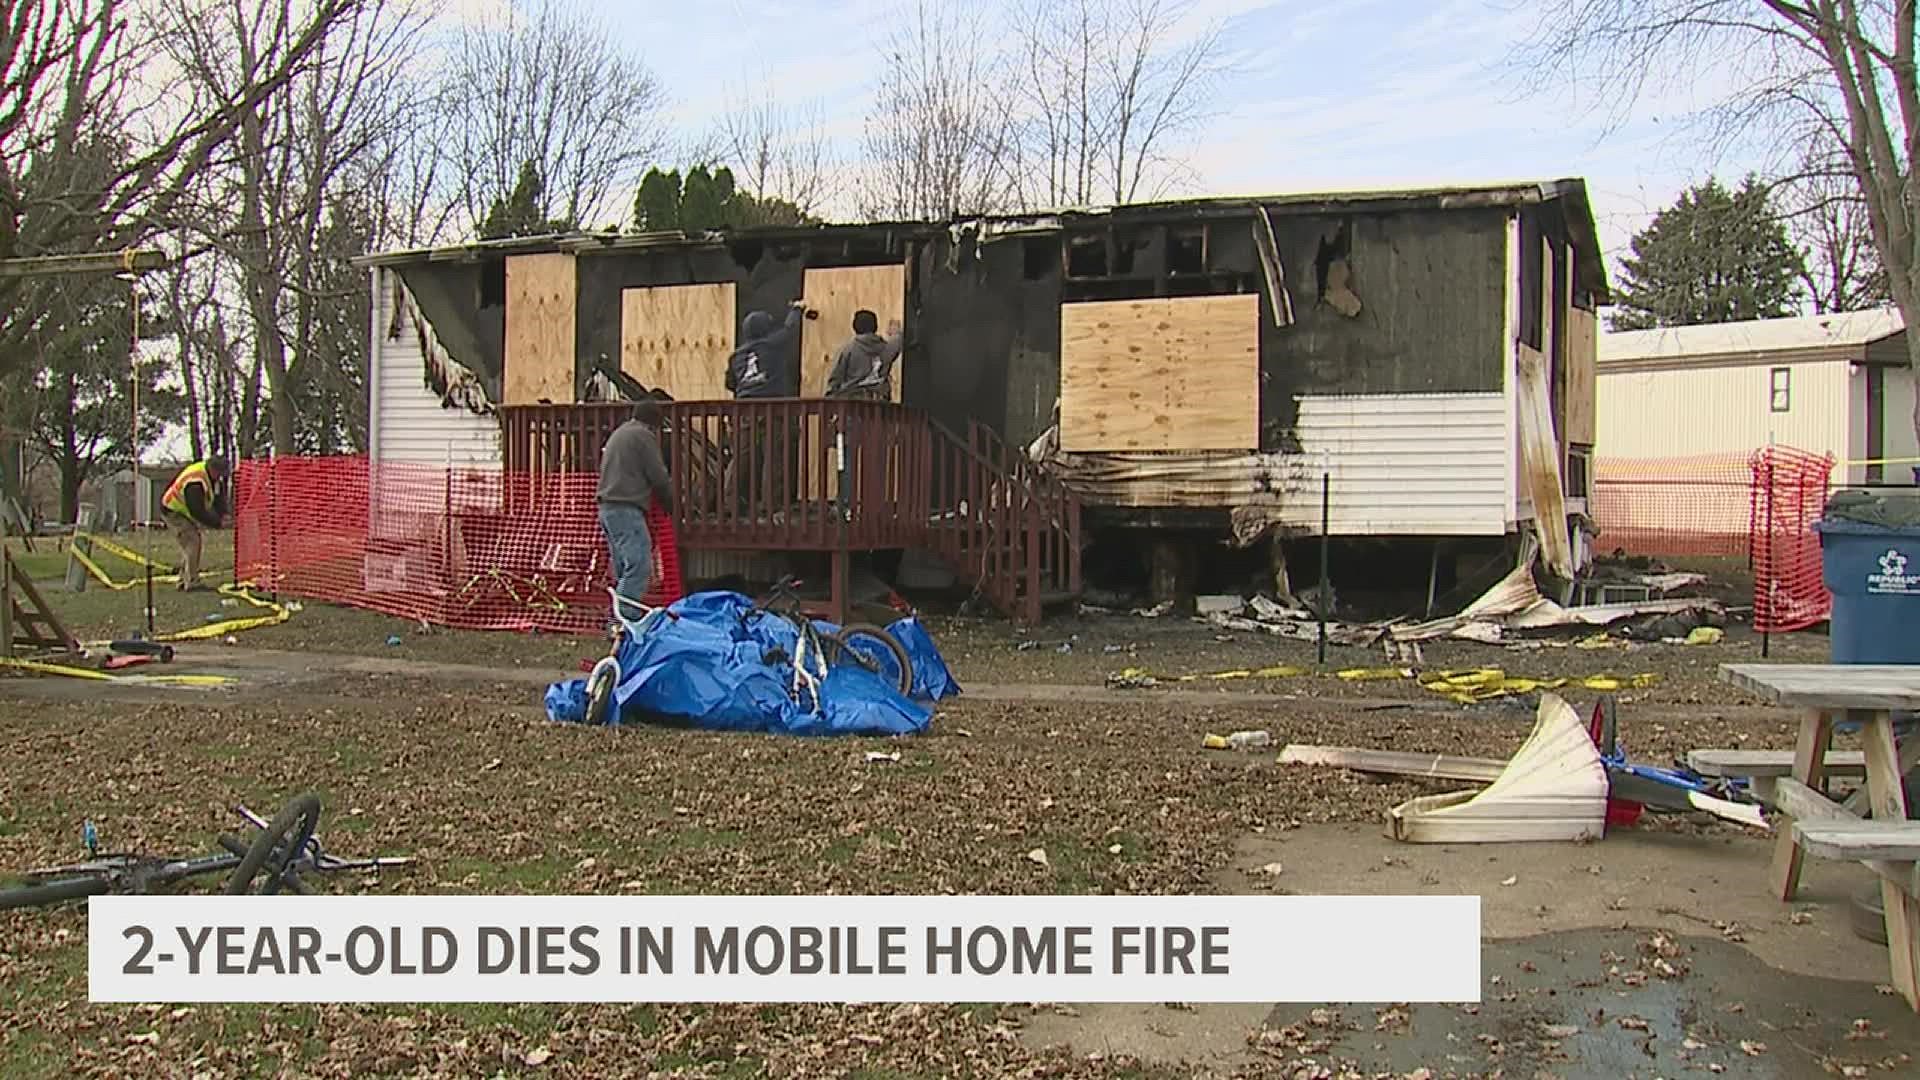 A fire broke out at a mobile home in Walcott, Iowa early Monday, and while six residents were able to escape, a two-year-old was found deceased in a back room.